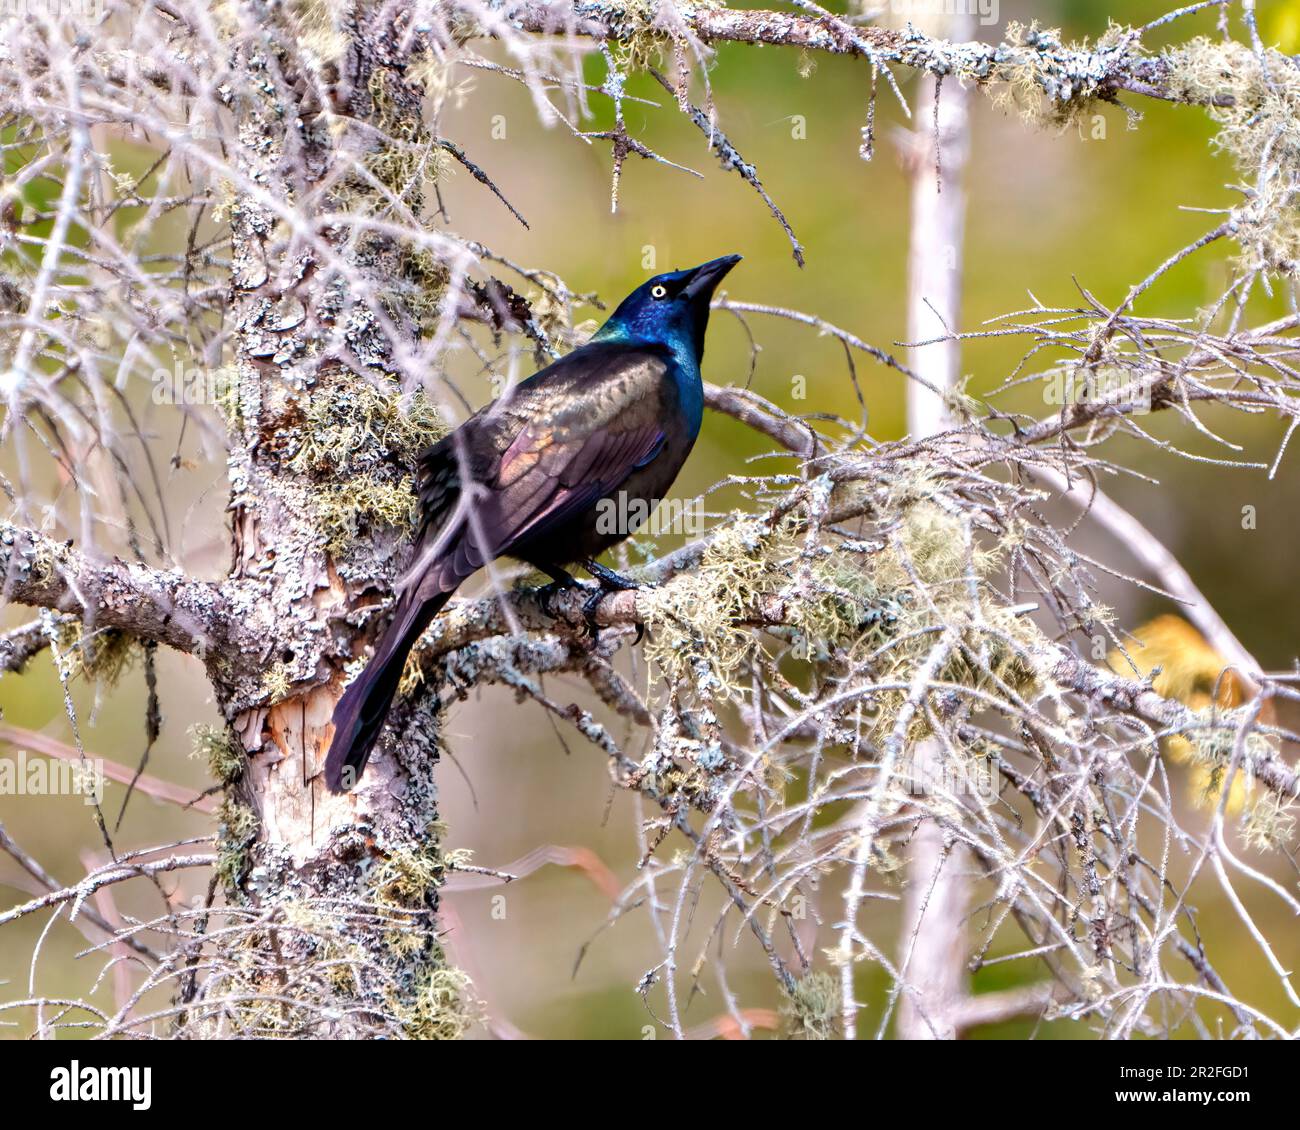 Common Grackle close-up side view perched on tree branches with background, displaying colourful plumage in its environment and habitat surrounding. Stock Photo